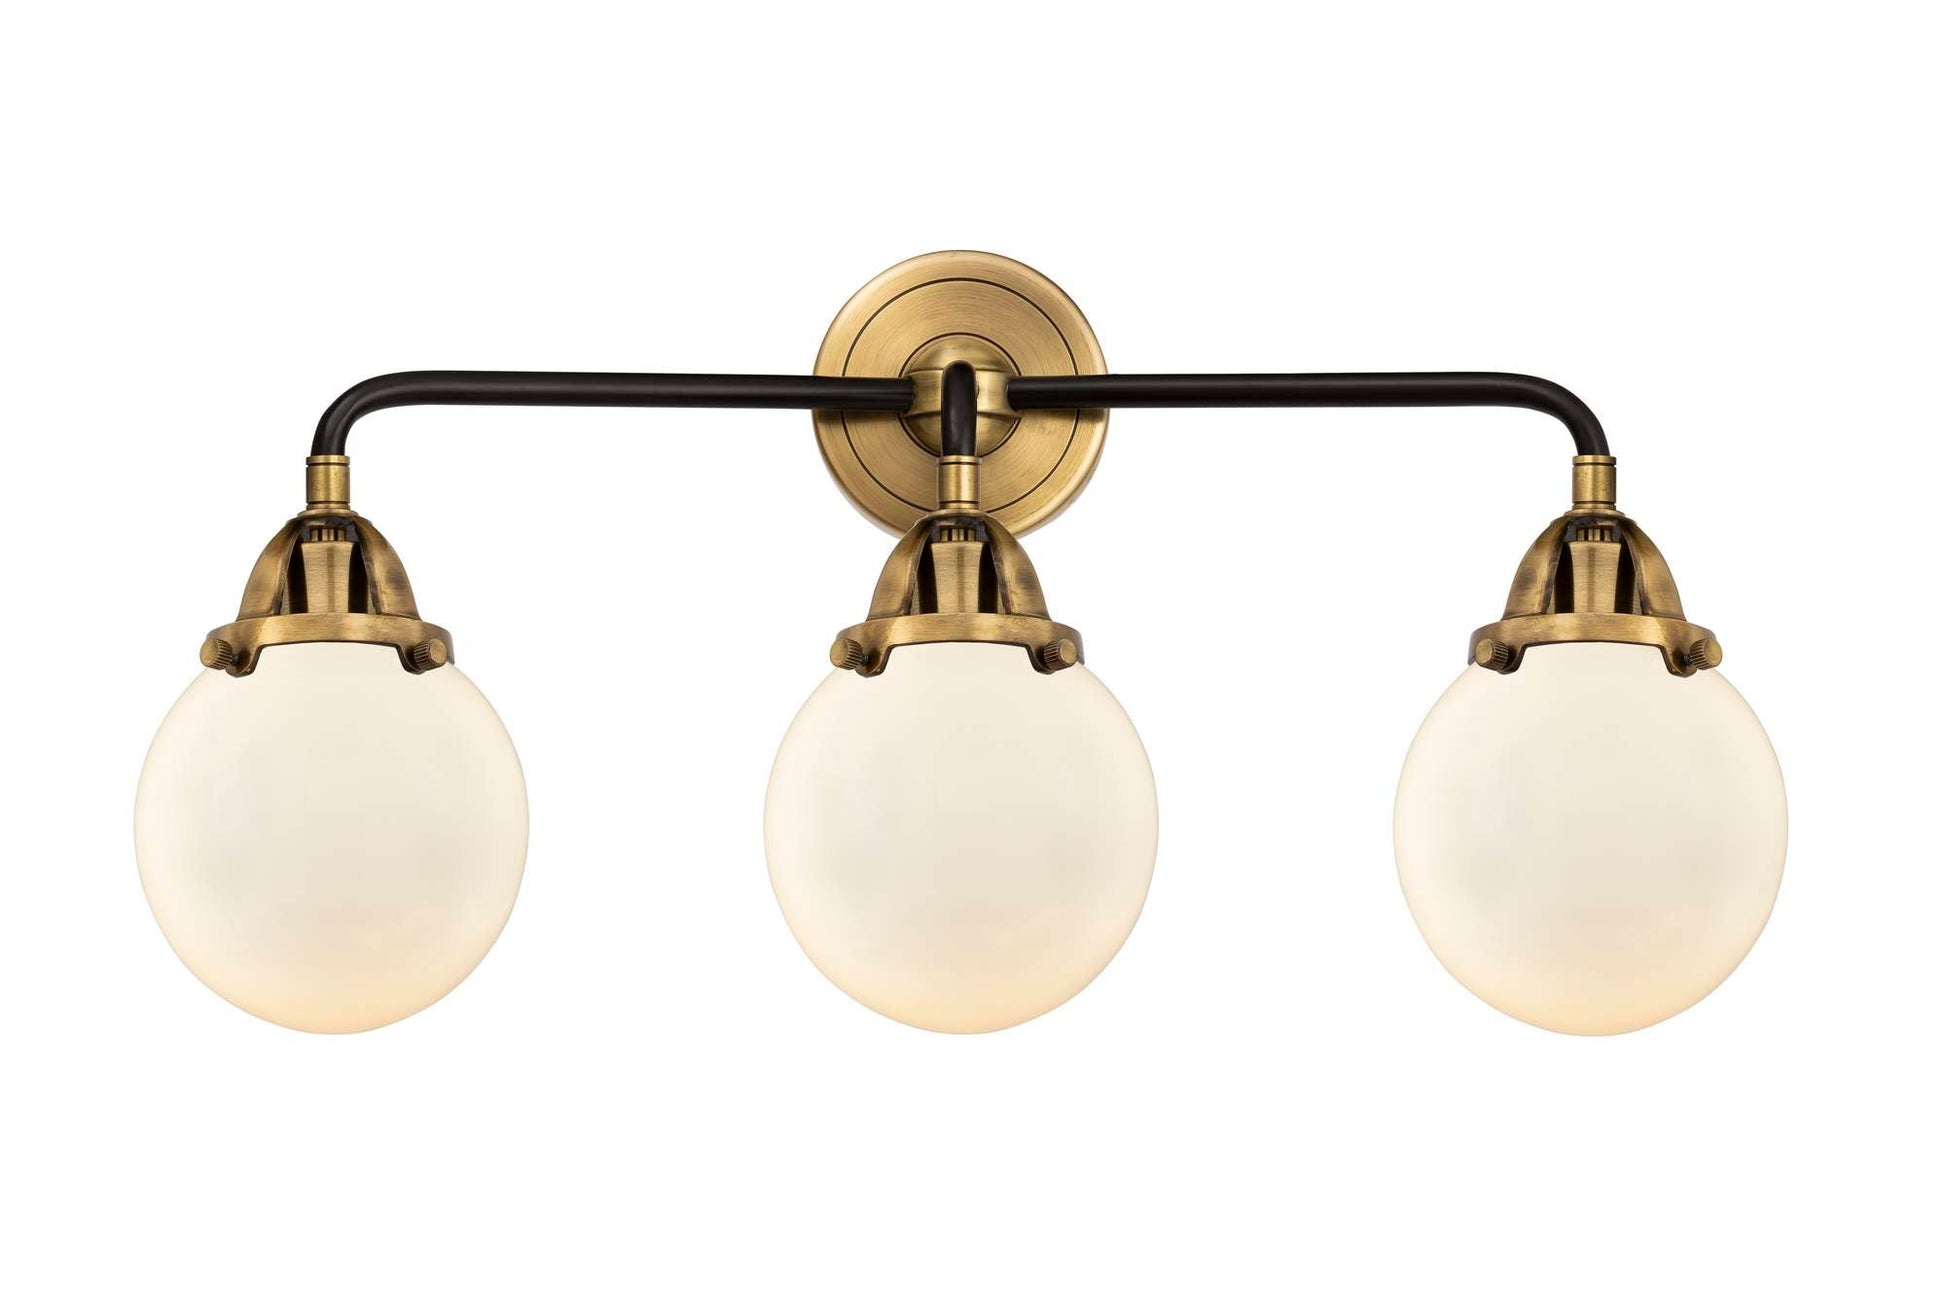 3-Light 24" Black Antique Brass Bath Vanity Light - Matte White Cased Beacon Glass Shades - Choice of Finish And Incandesent Or LED Bulbs